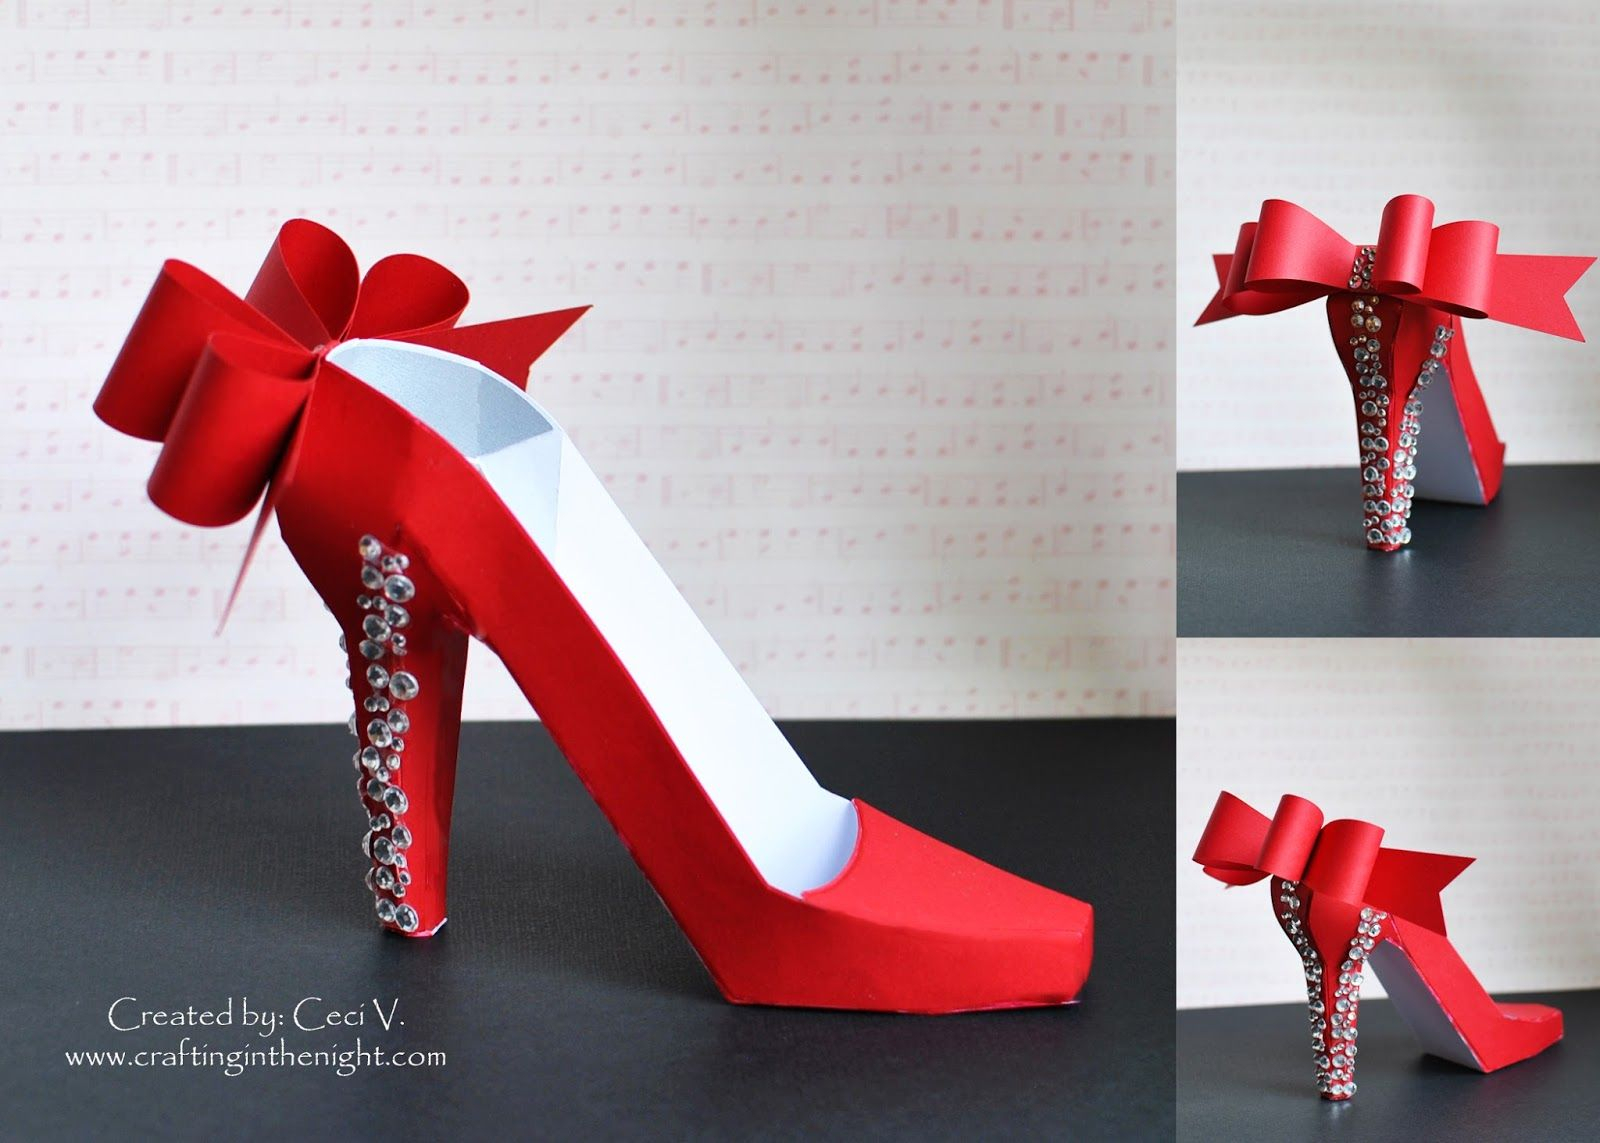 Crafting In The Night: 3D High Heel Shoe – Svgcuts | 3D Inside High Heel Template For Cards